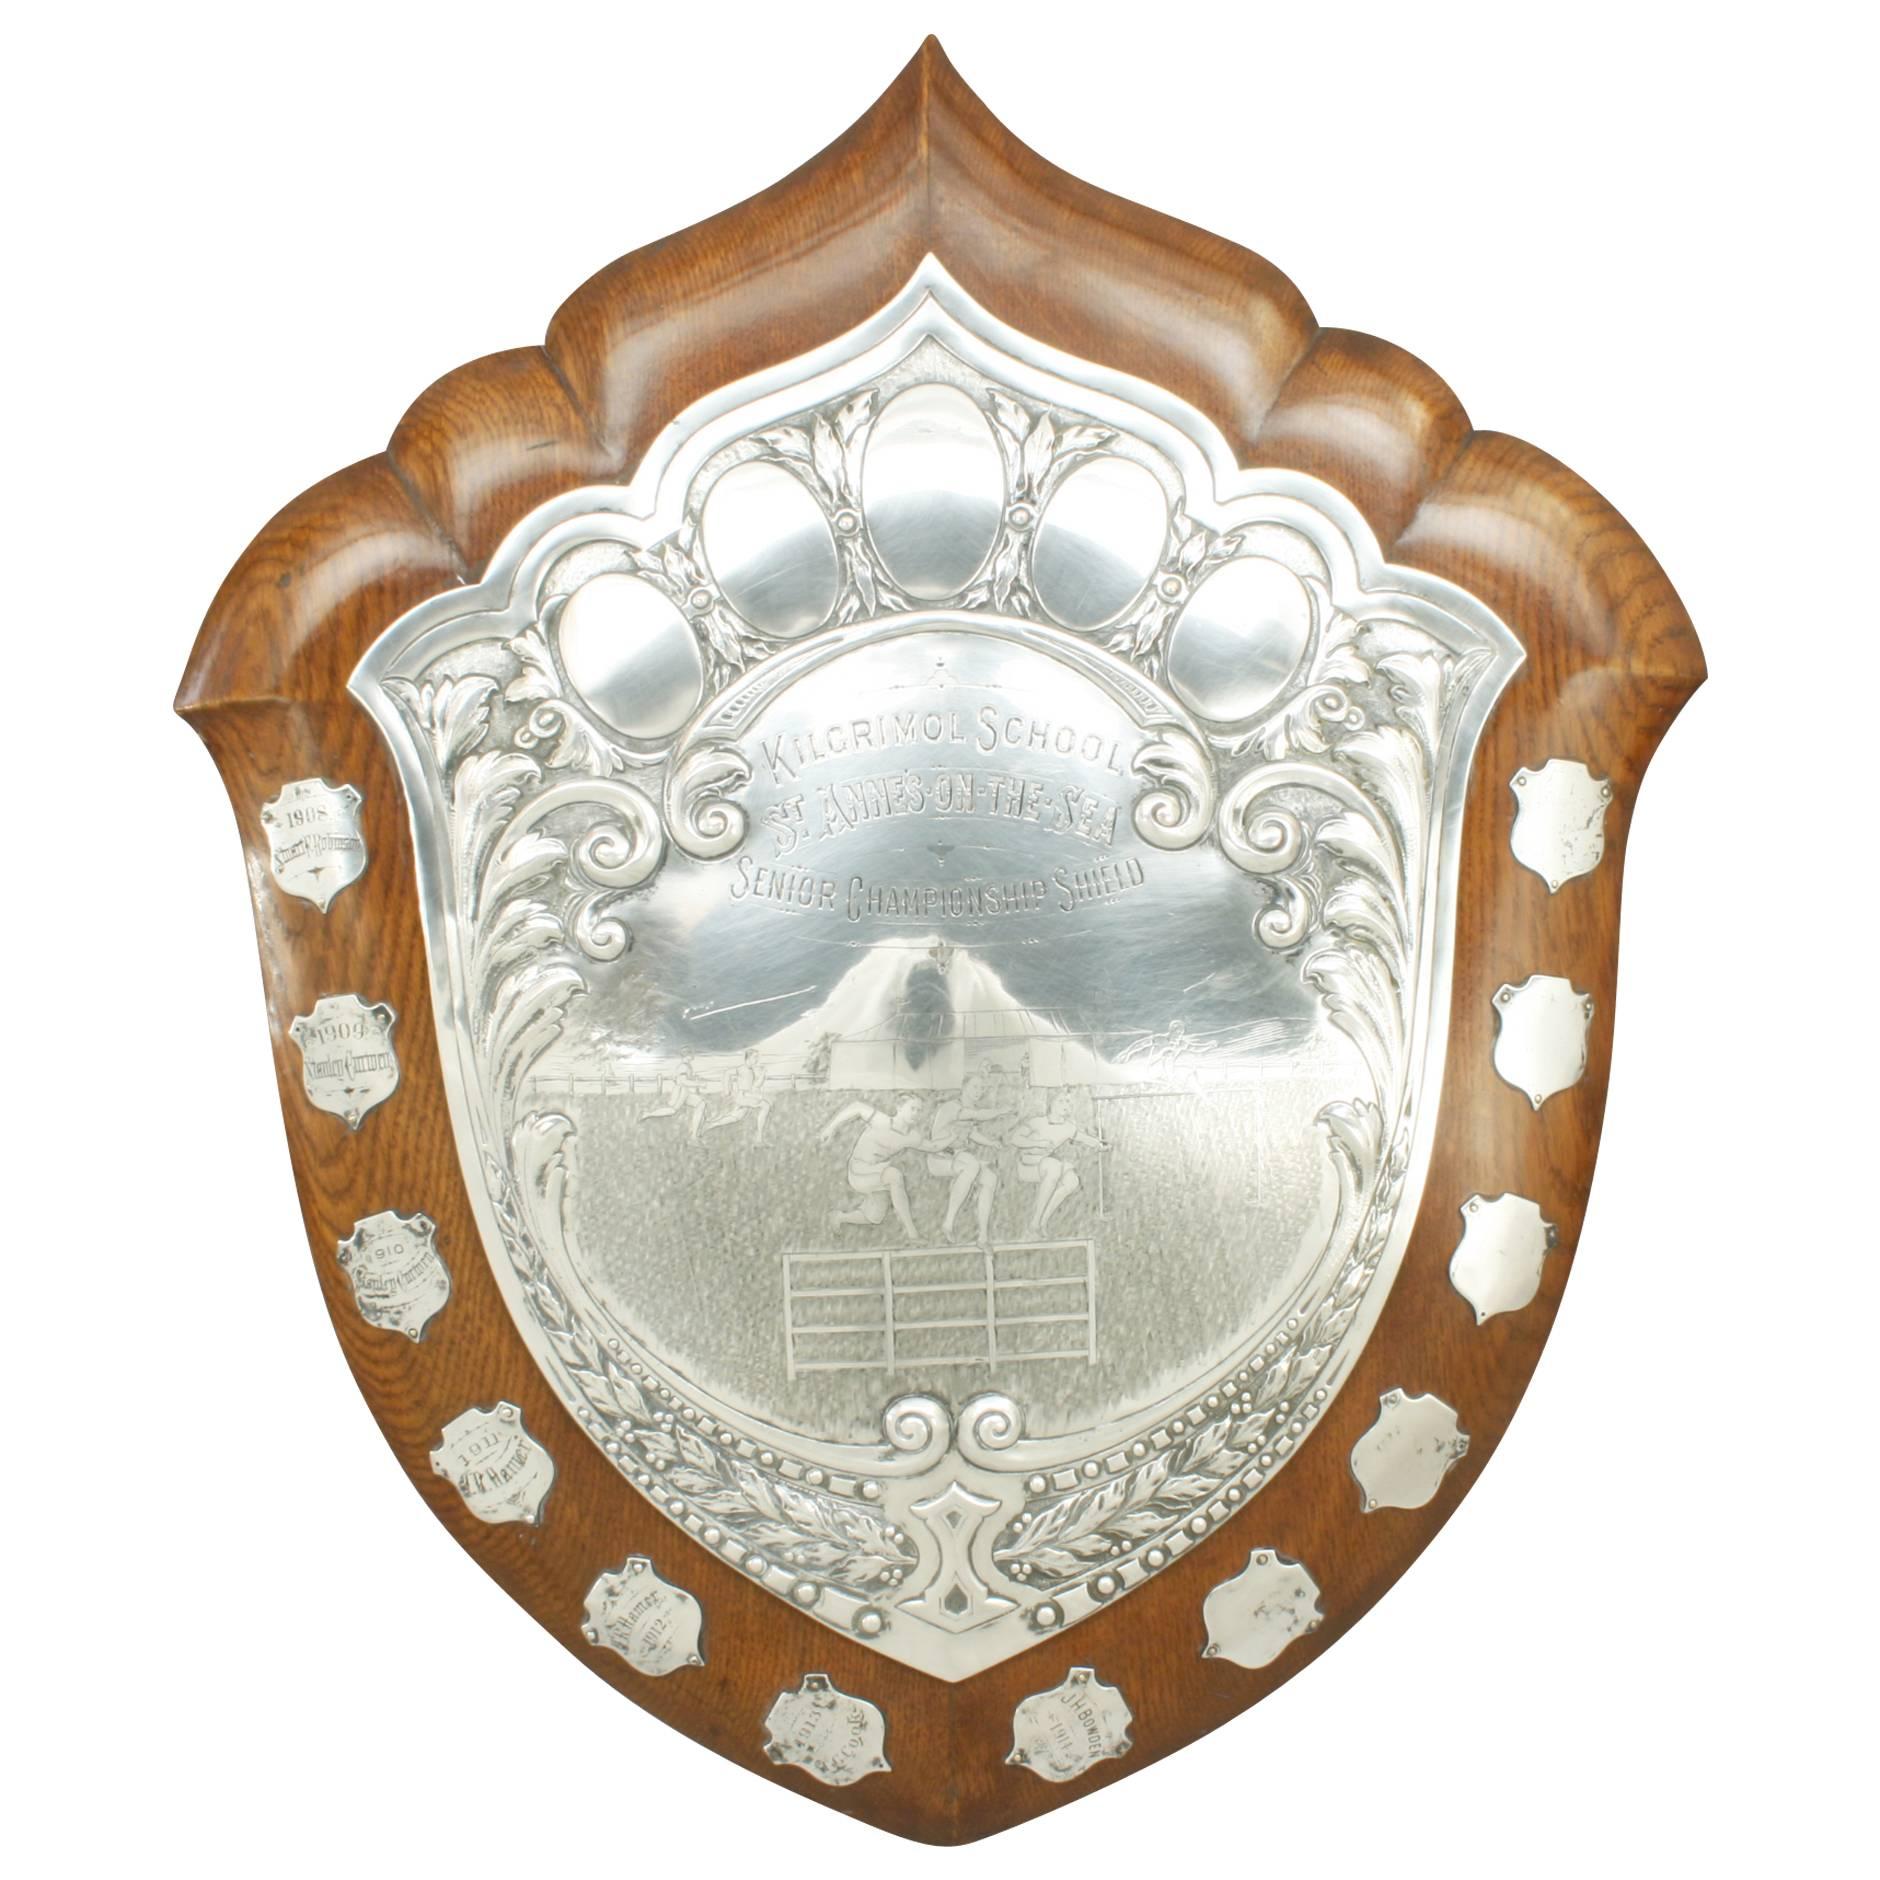 Presentation Shield Trophy, walker and hall.
A large free-standing, oak Athletics Shield Trophy with Sheffield plate decoration. The 'Senior Championship Shield' was presented by Kilgrimol School, St. Annes-on-the-Sea and was manufactured by the